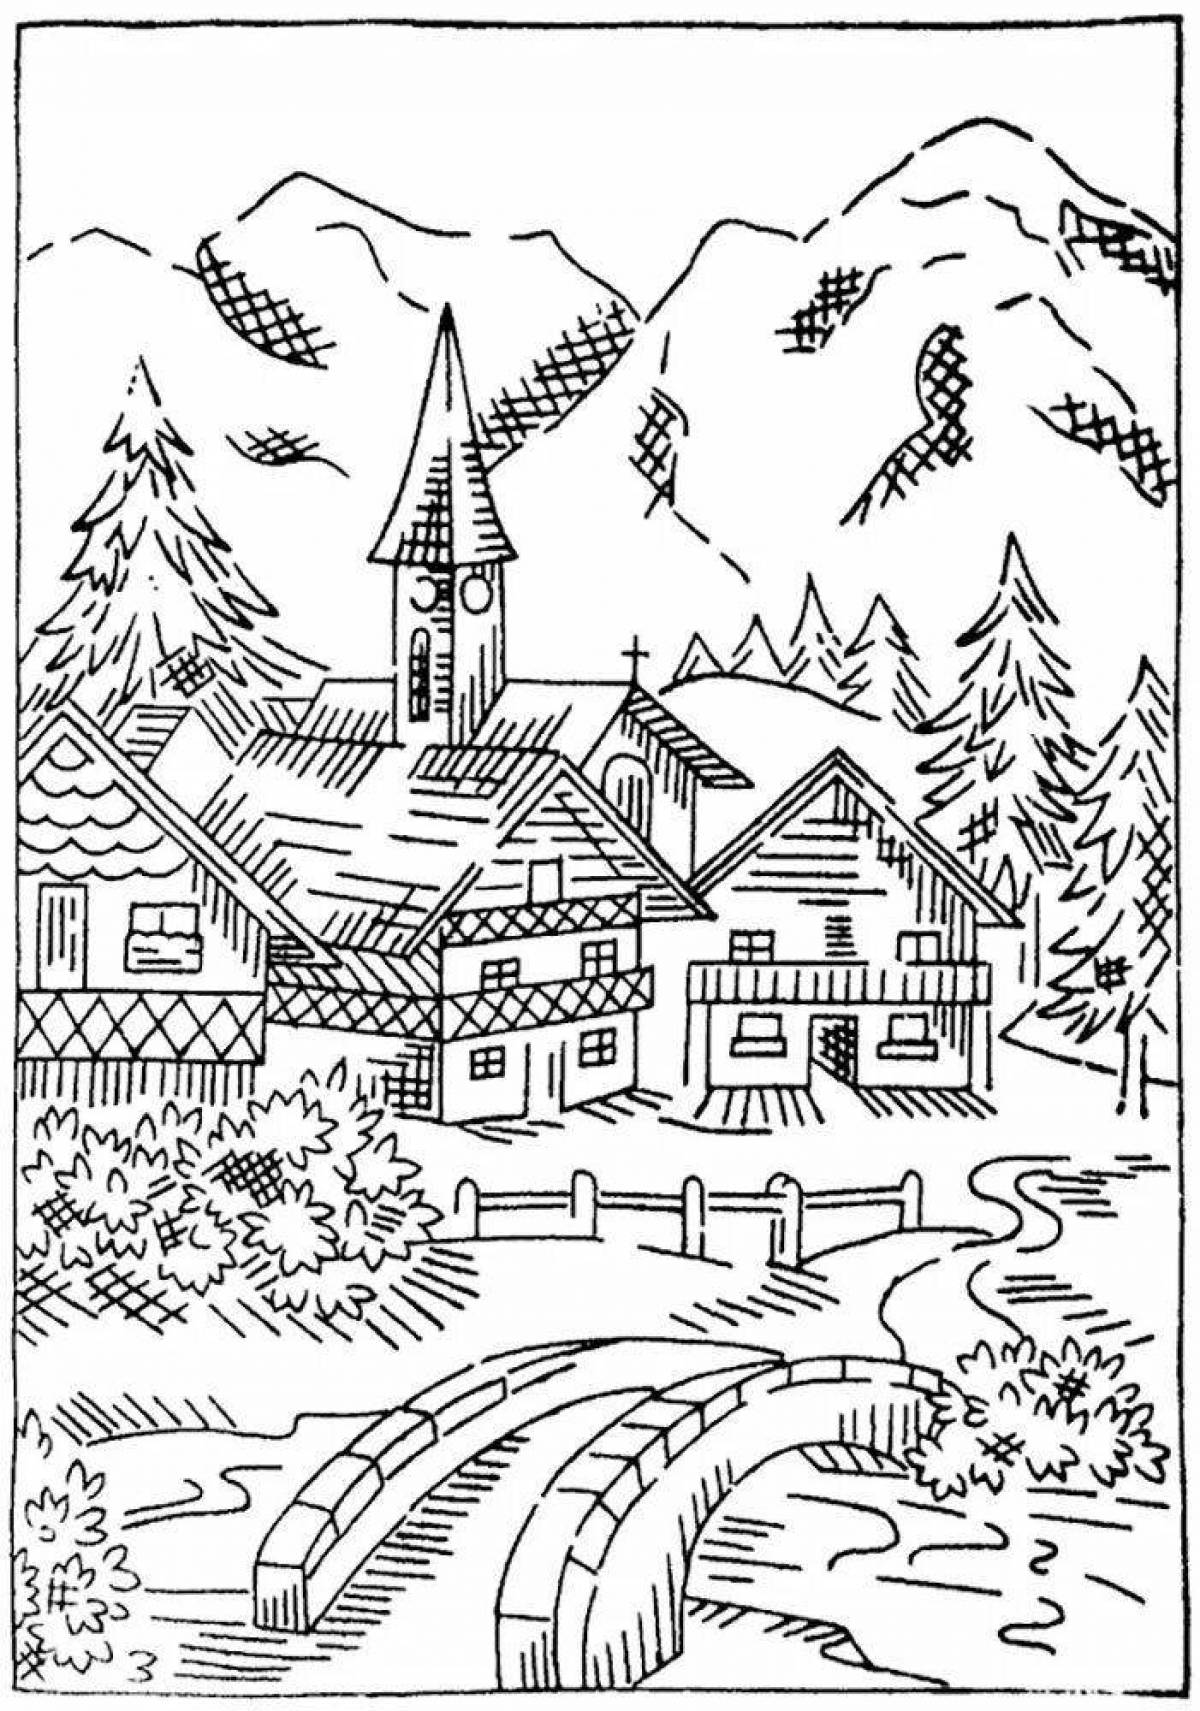 Great village coloring book for kids